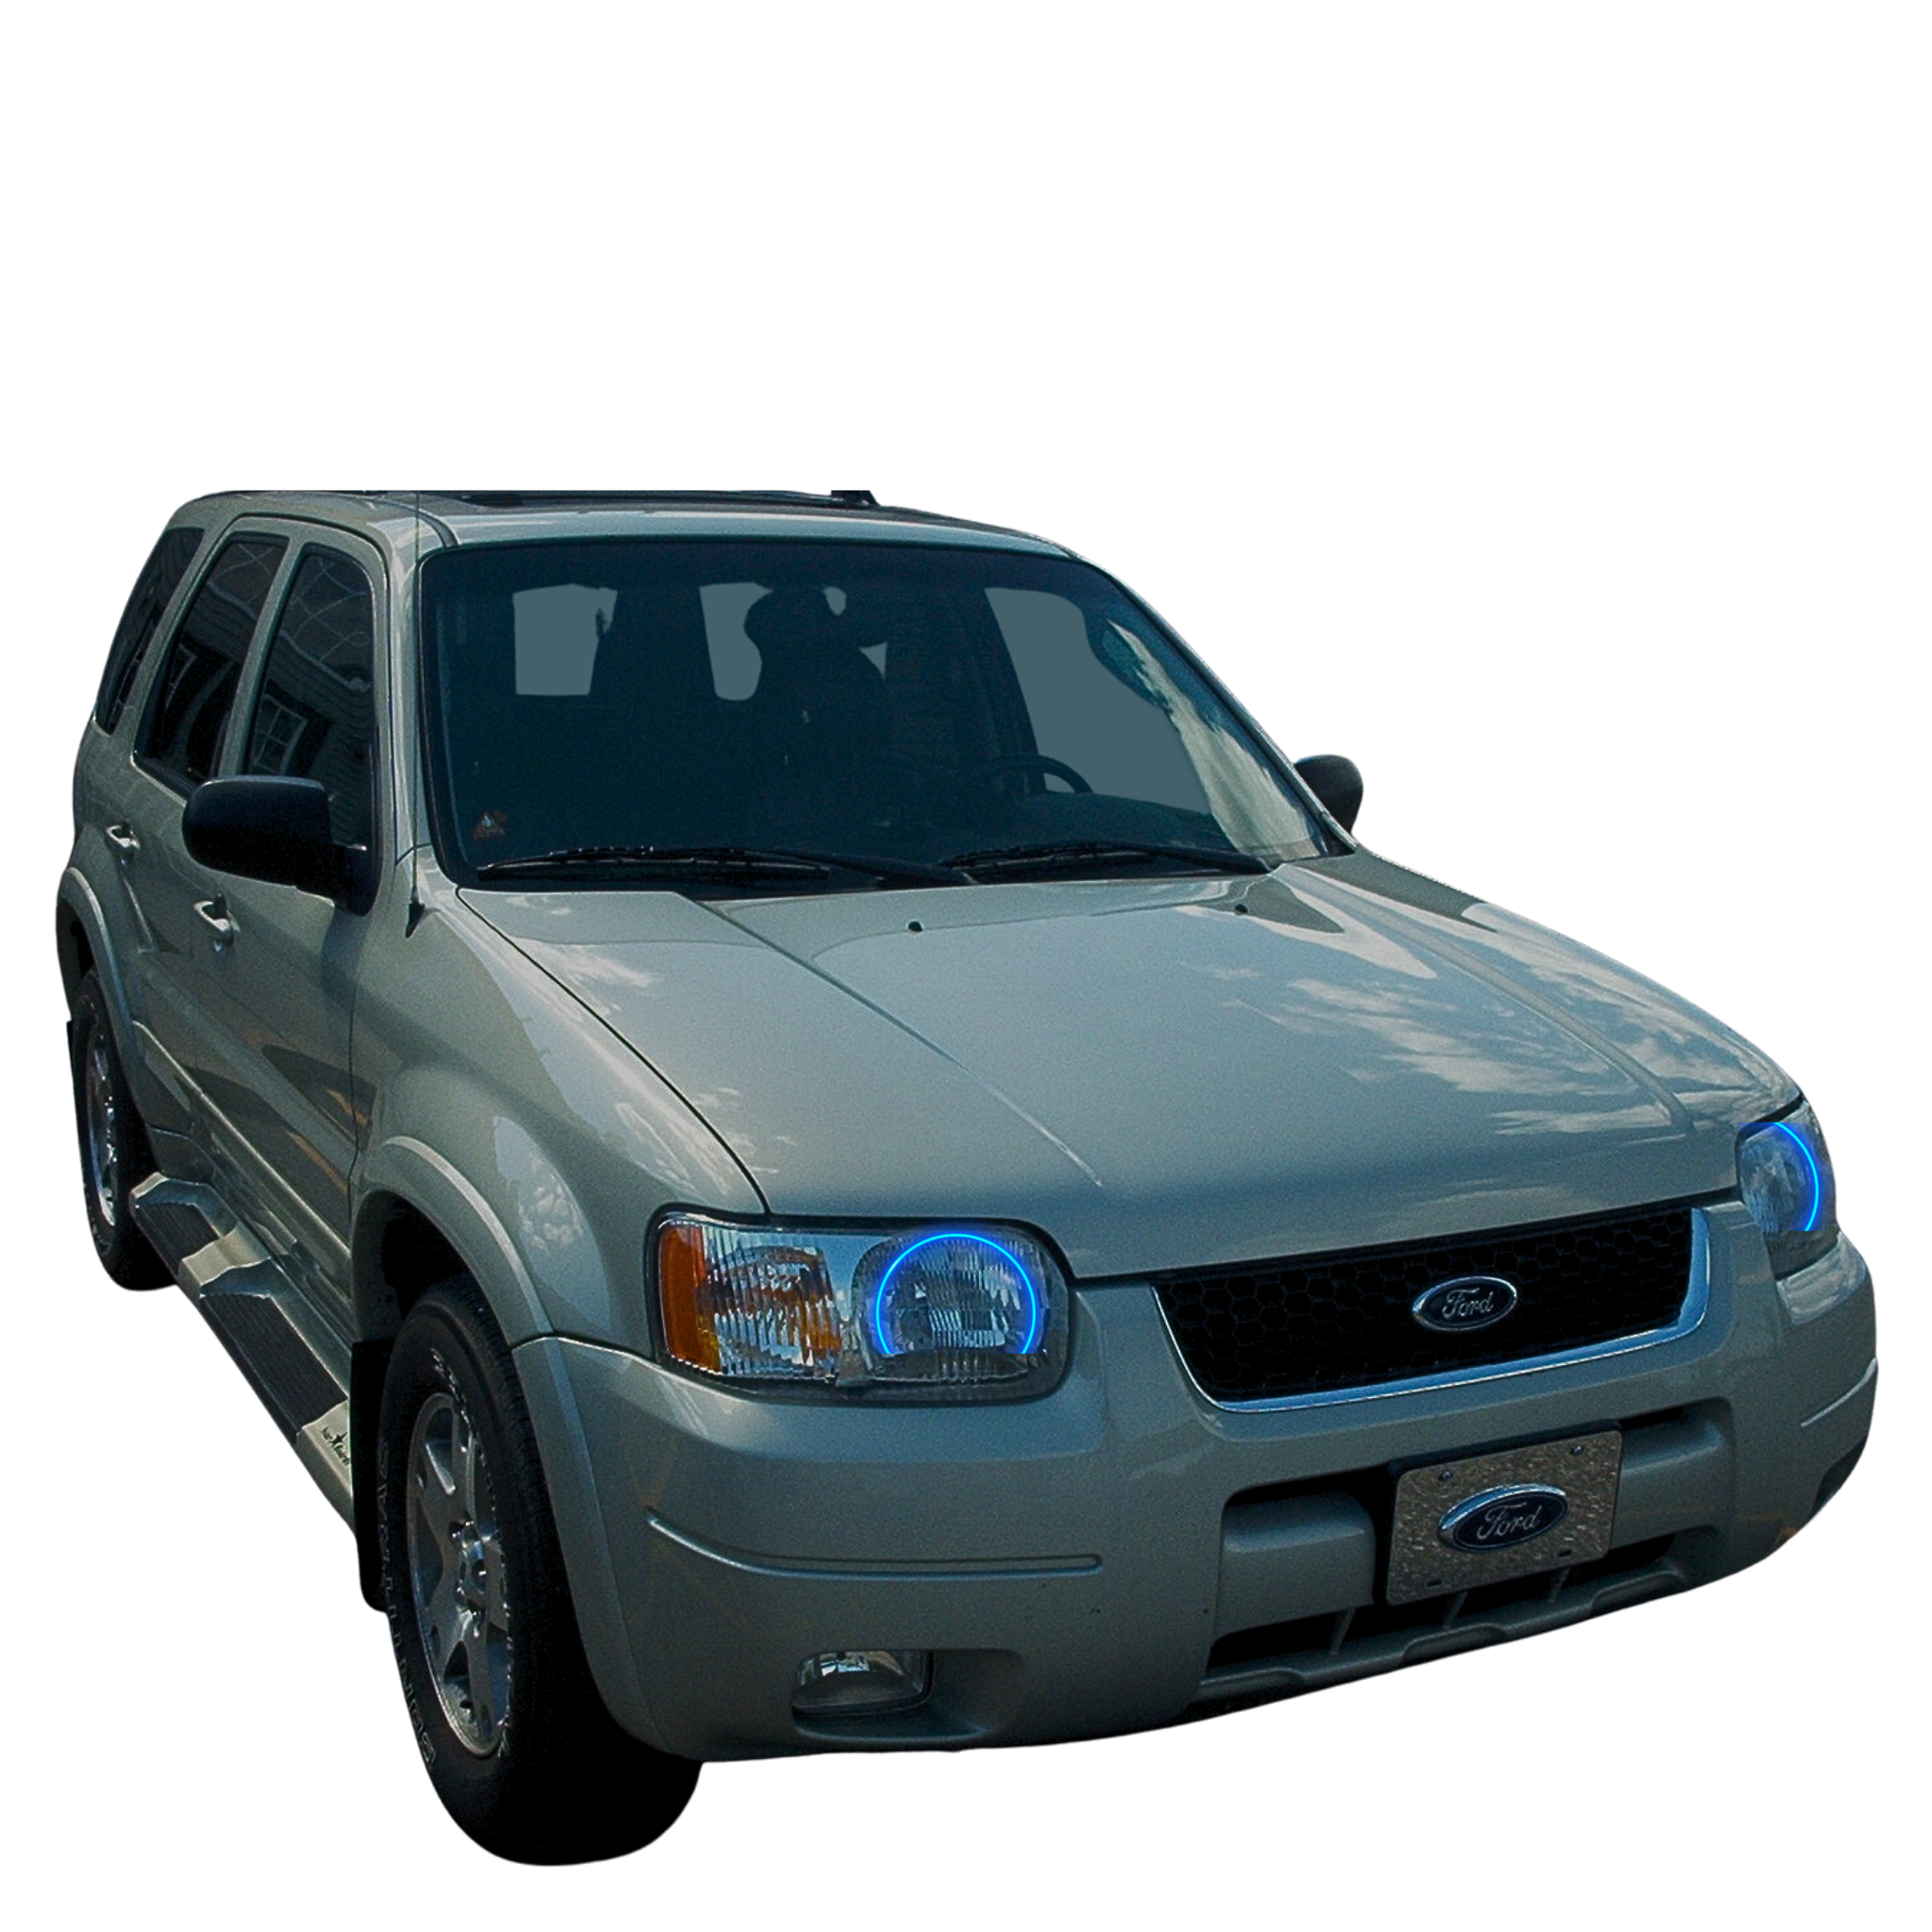 2001-2004 Ford Escape Multicolor Halo Kit - RGB Halo Kits Multicolor Flow Series Color Chasing RGBWA LED headlight kit Colorshift Oracle Lighting Trendz OneUpLighting Morimoto theretrofitsource AutoLEDTech Diode Dynamics